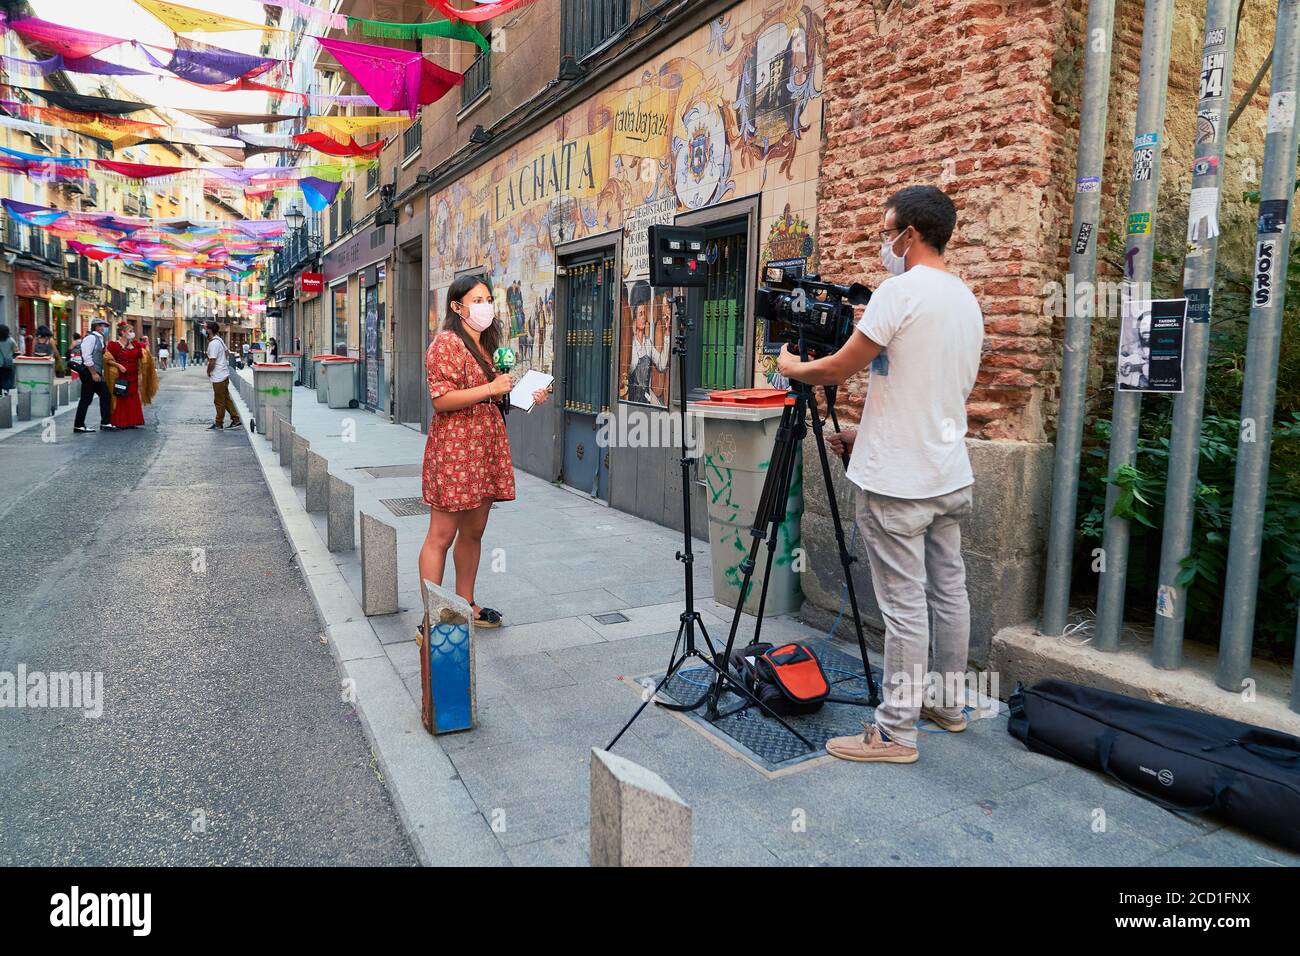 A TV crew from Spain's La Sexta record the practically empty street normally busy for Virgen de la paloma festival La Latina Madrid,Spain, August 2020 Stock Photo